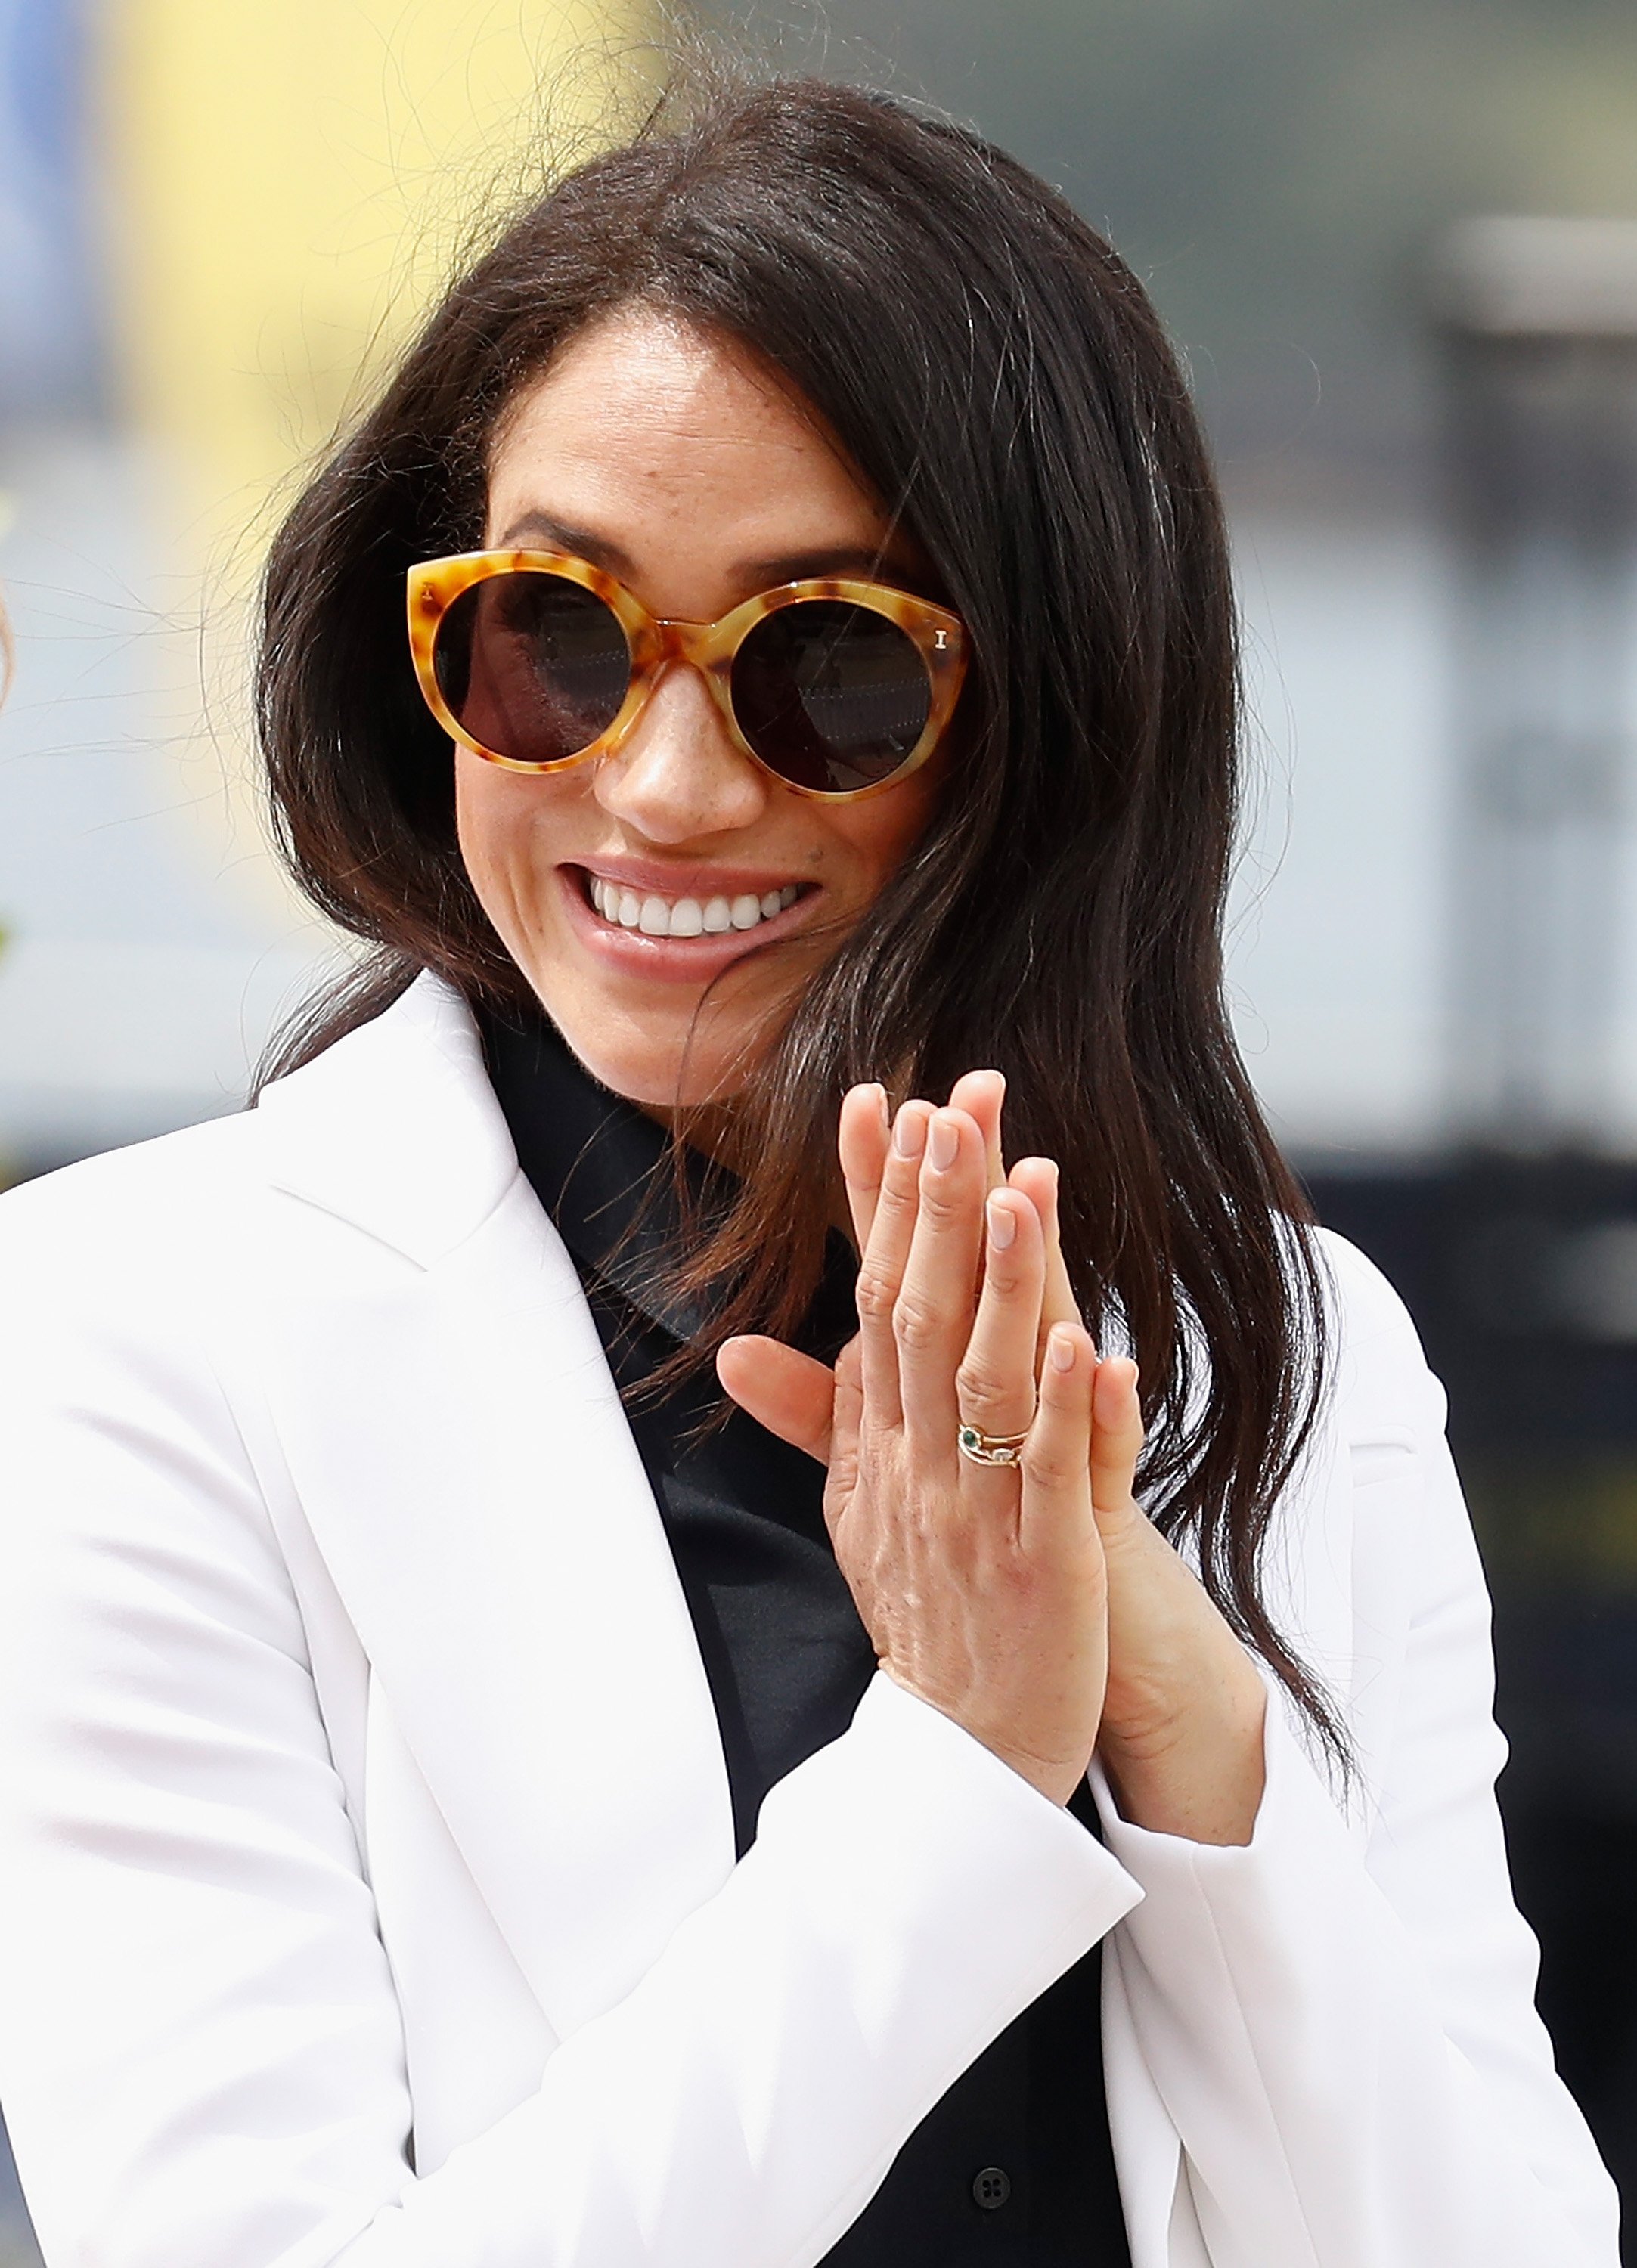 Meghan Markle, Duchess of Sussex | Photo: Getty Images